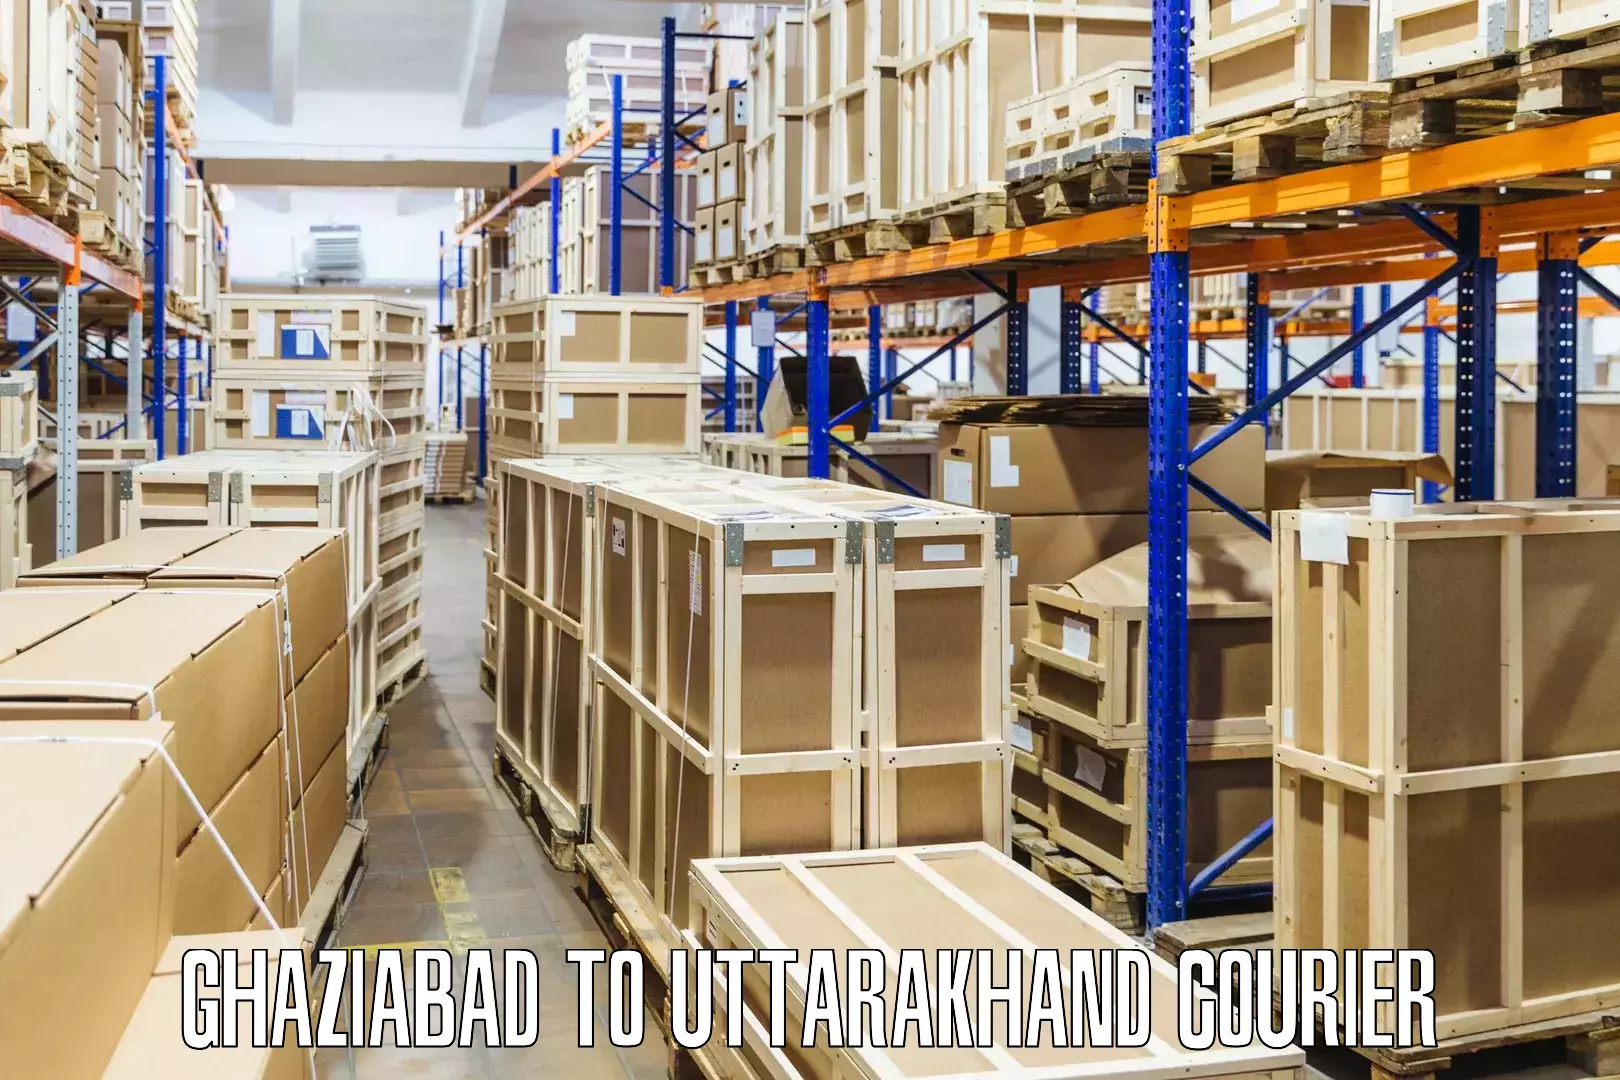 Seamless shipping experience Ghaziabad to IIT Roorkee